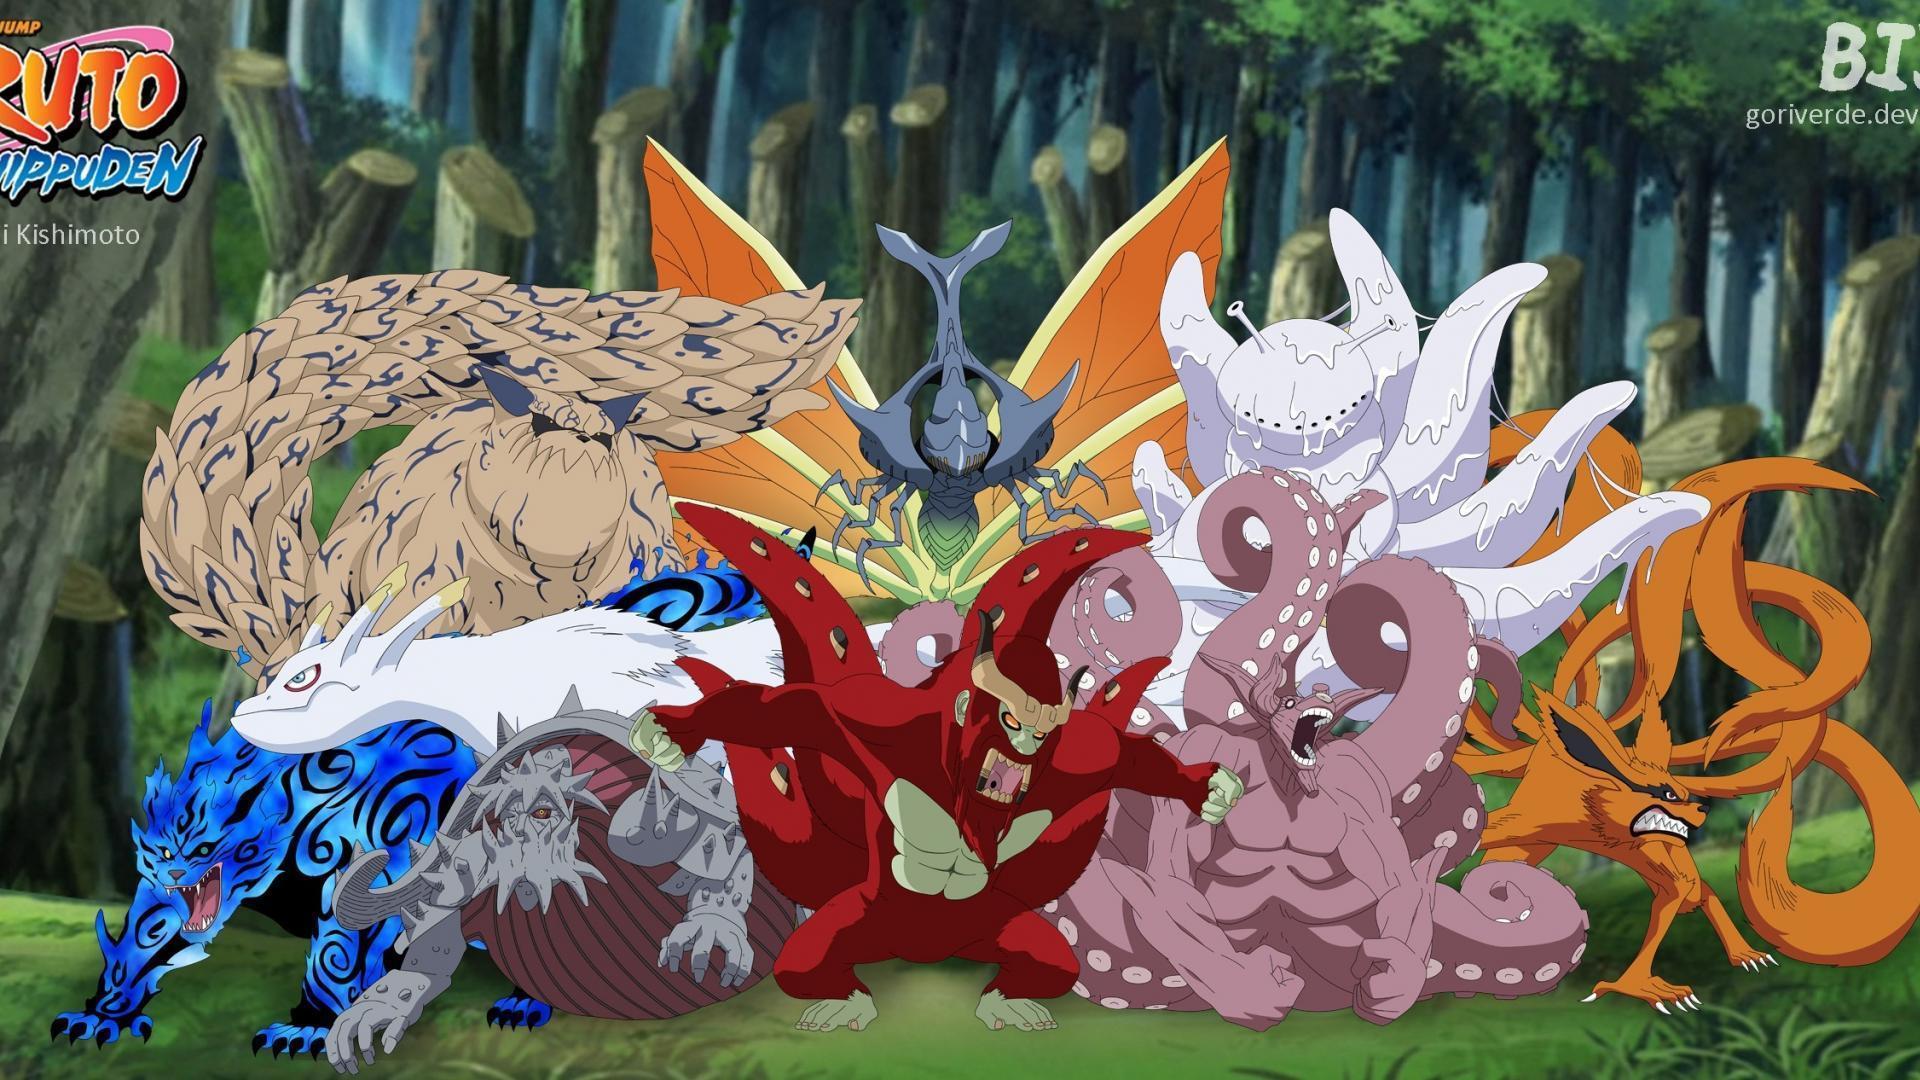 Disconected When A Tailed Beast Has Spawned.